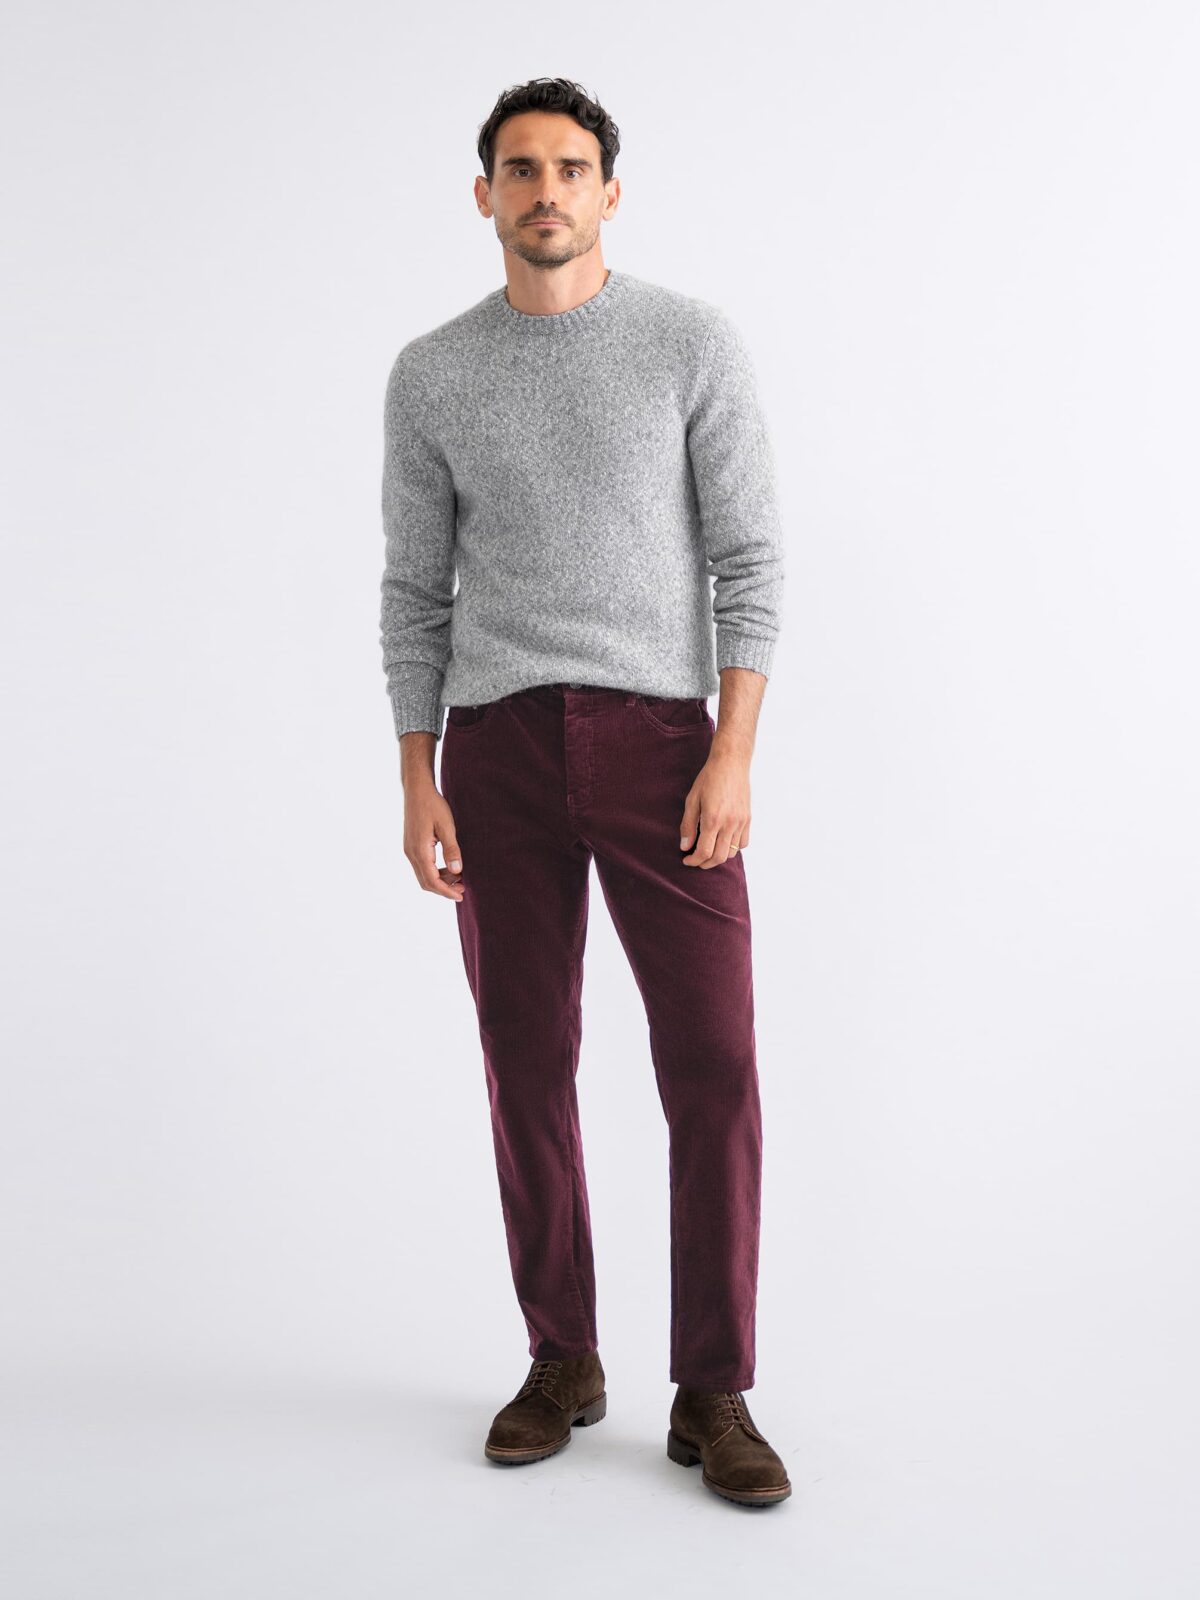 Crisp white dress shirt paired with our heathered maroon pants for a killer  winter look. #stateandlib #athleticfit #stretchdressshirts | Instagram